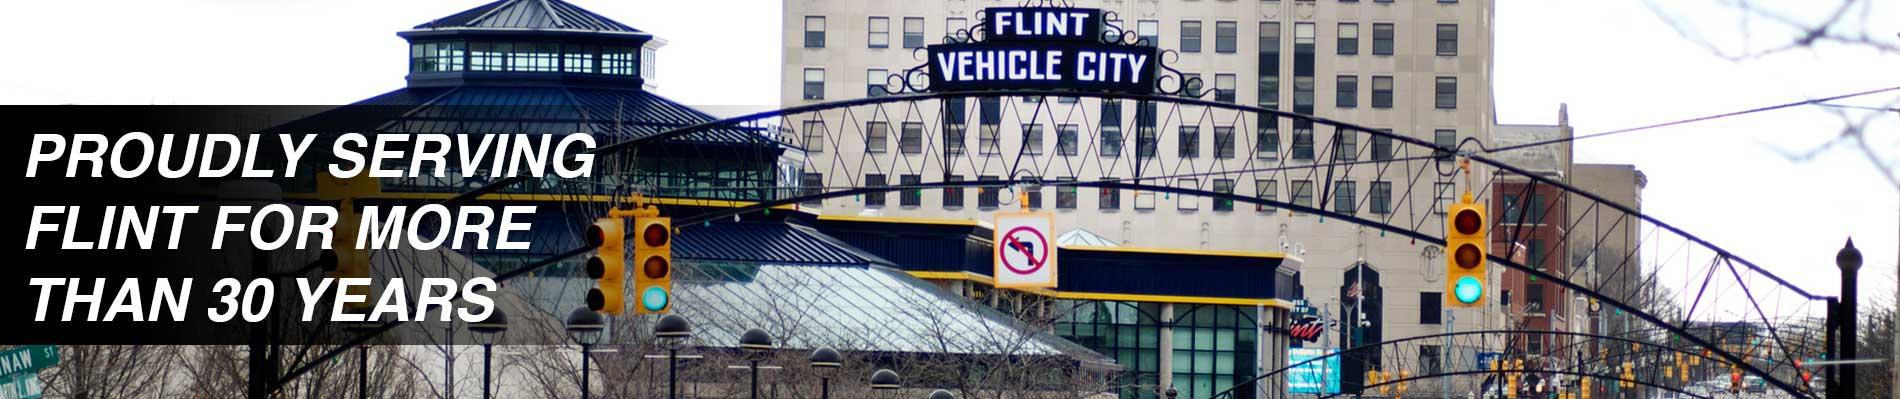 Proudly Serving Flint for More Than 30 Years!